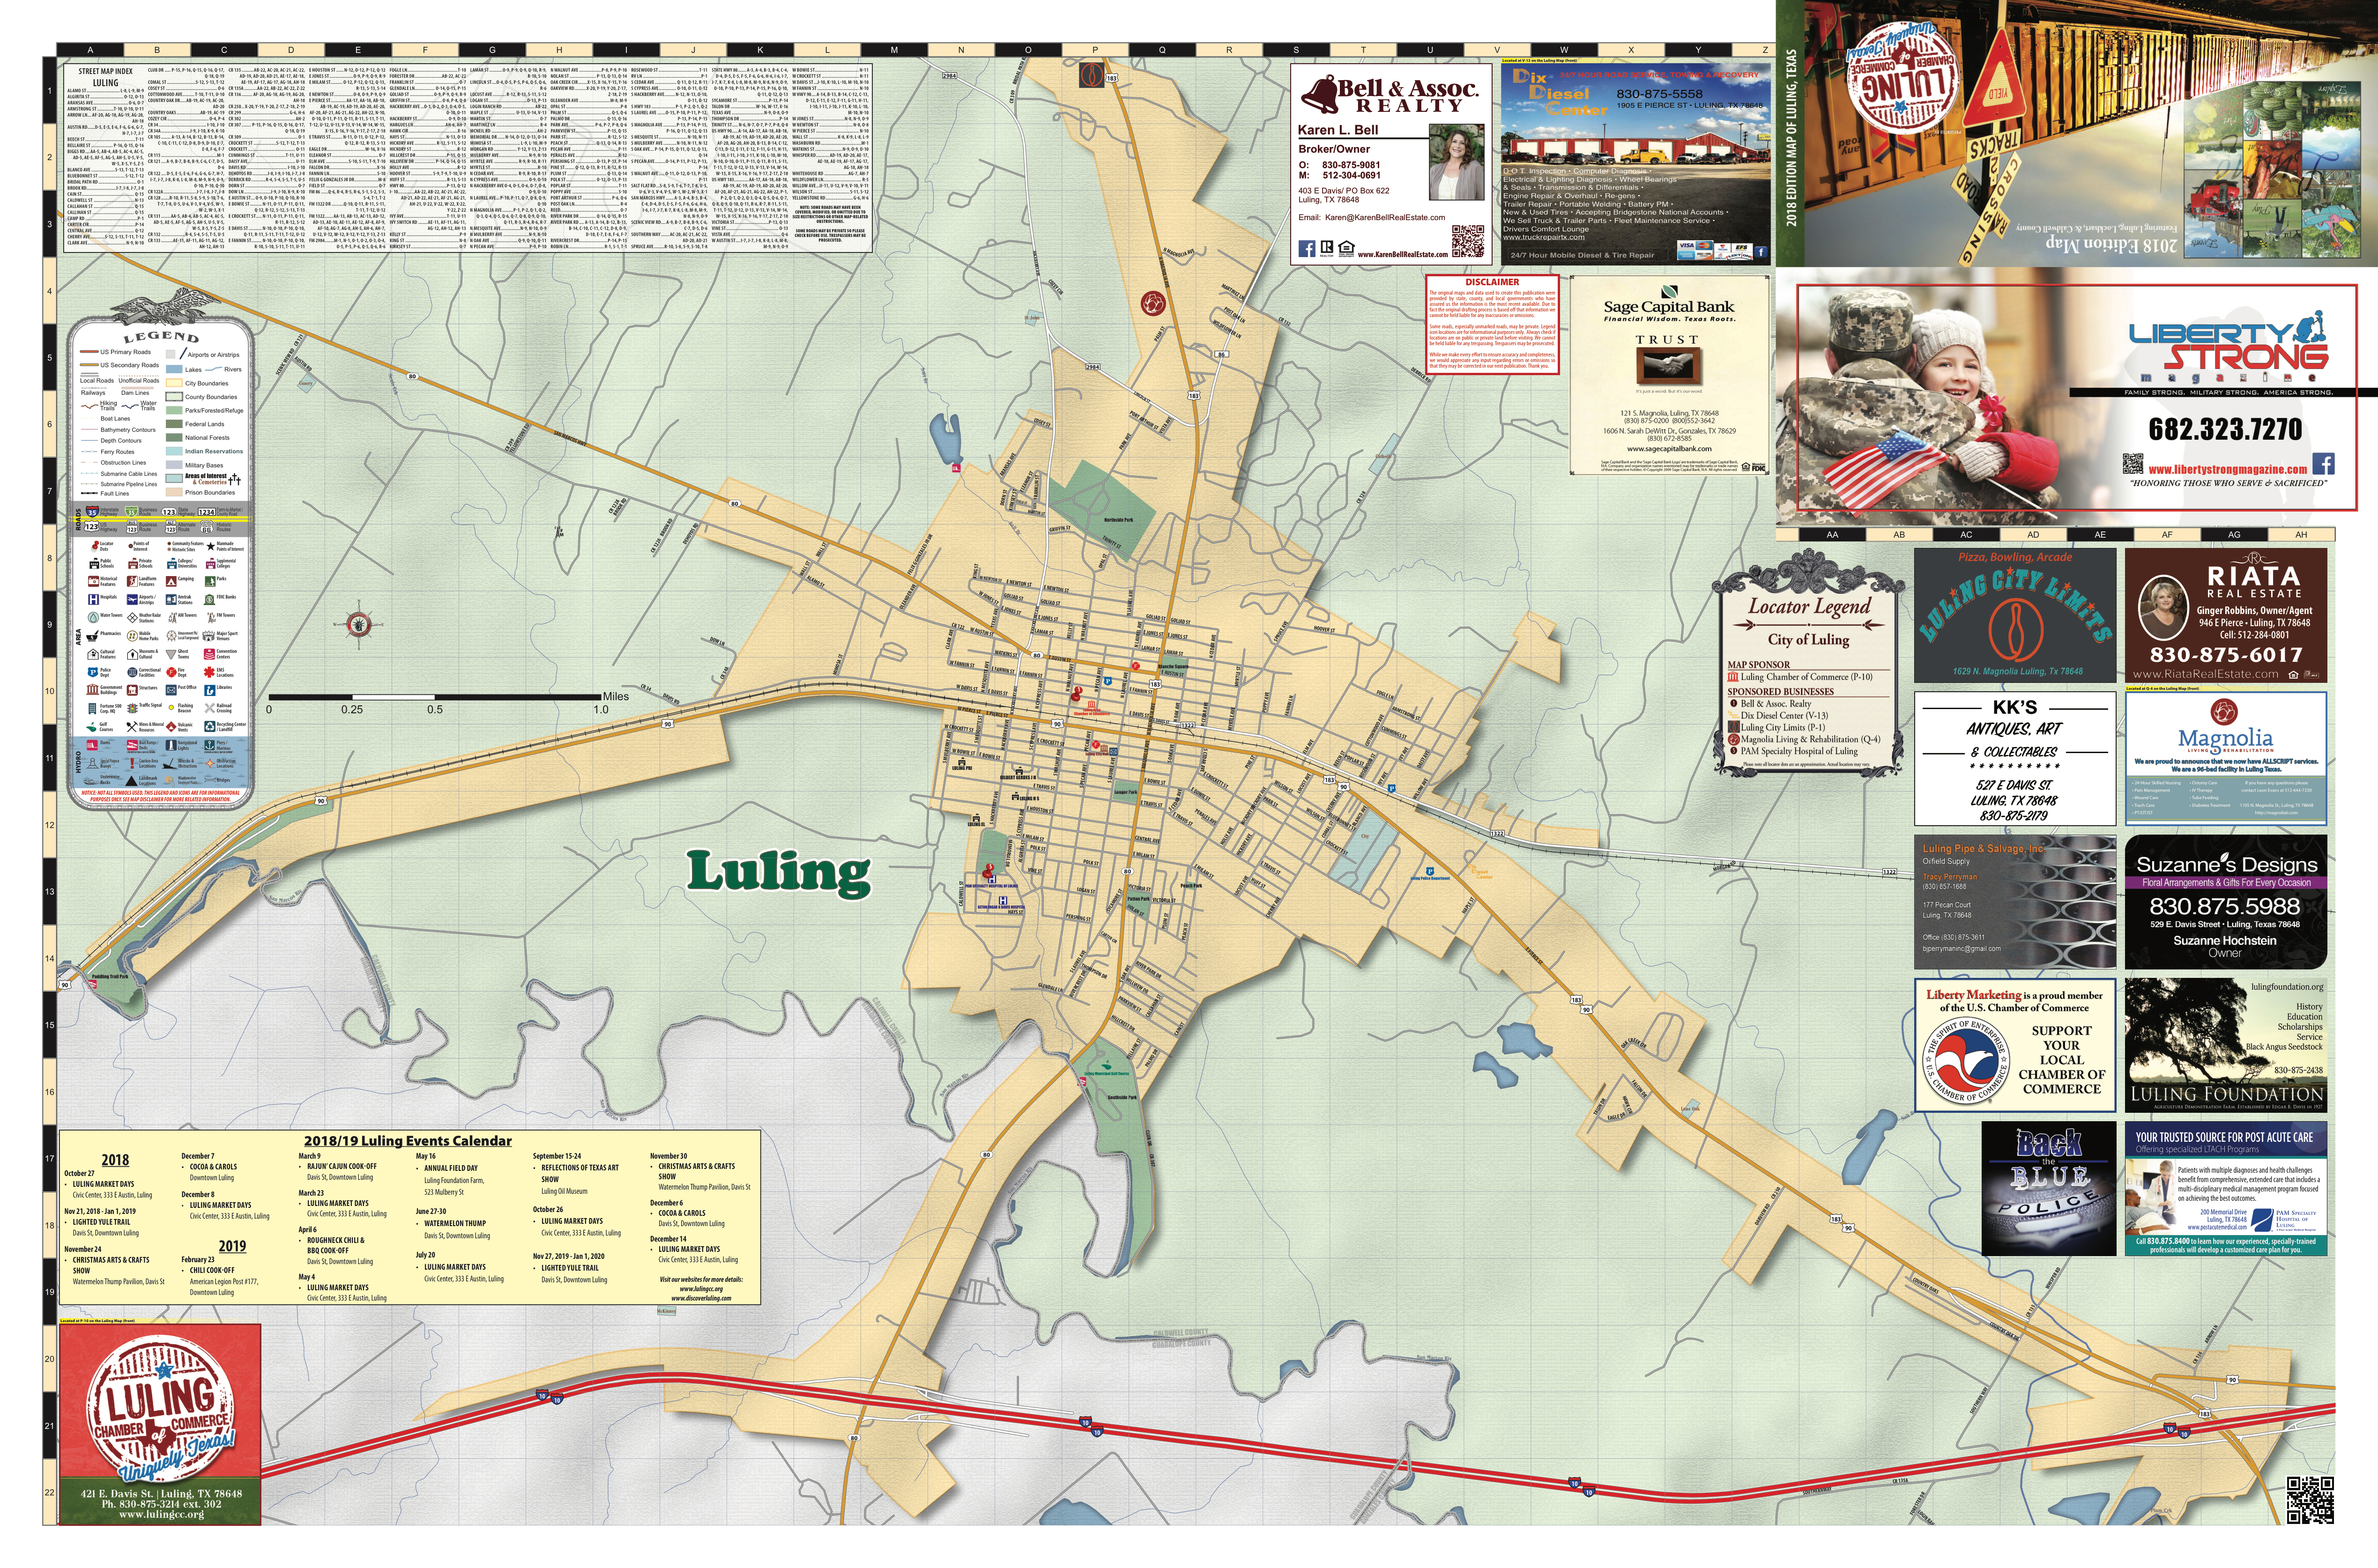 2018 Edition Map Of Luling, Tx - Luling Texas Map